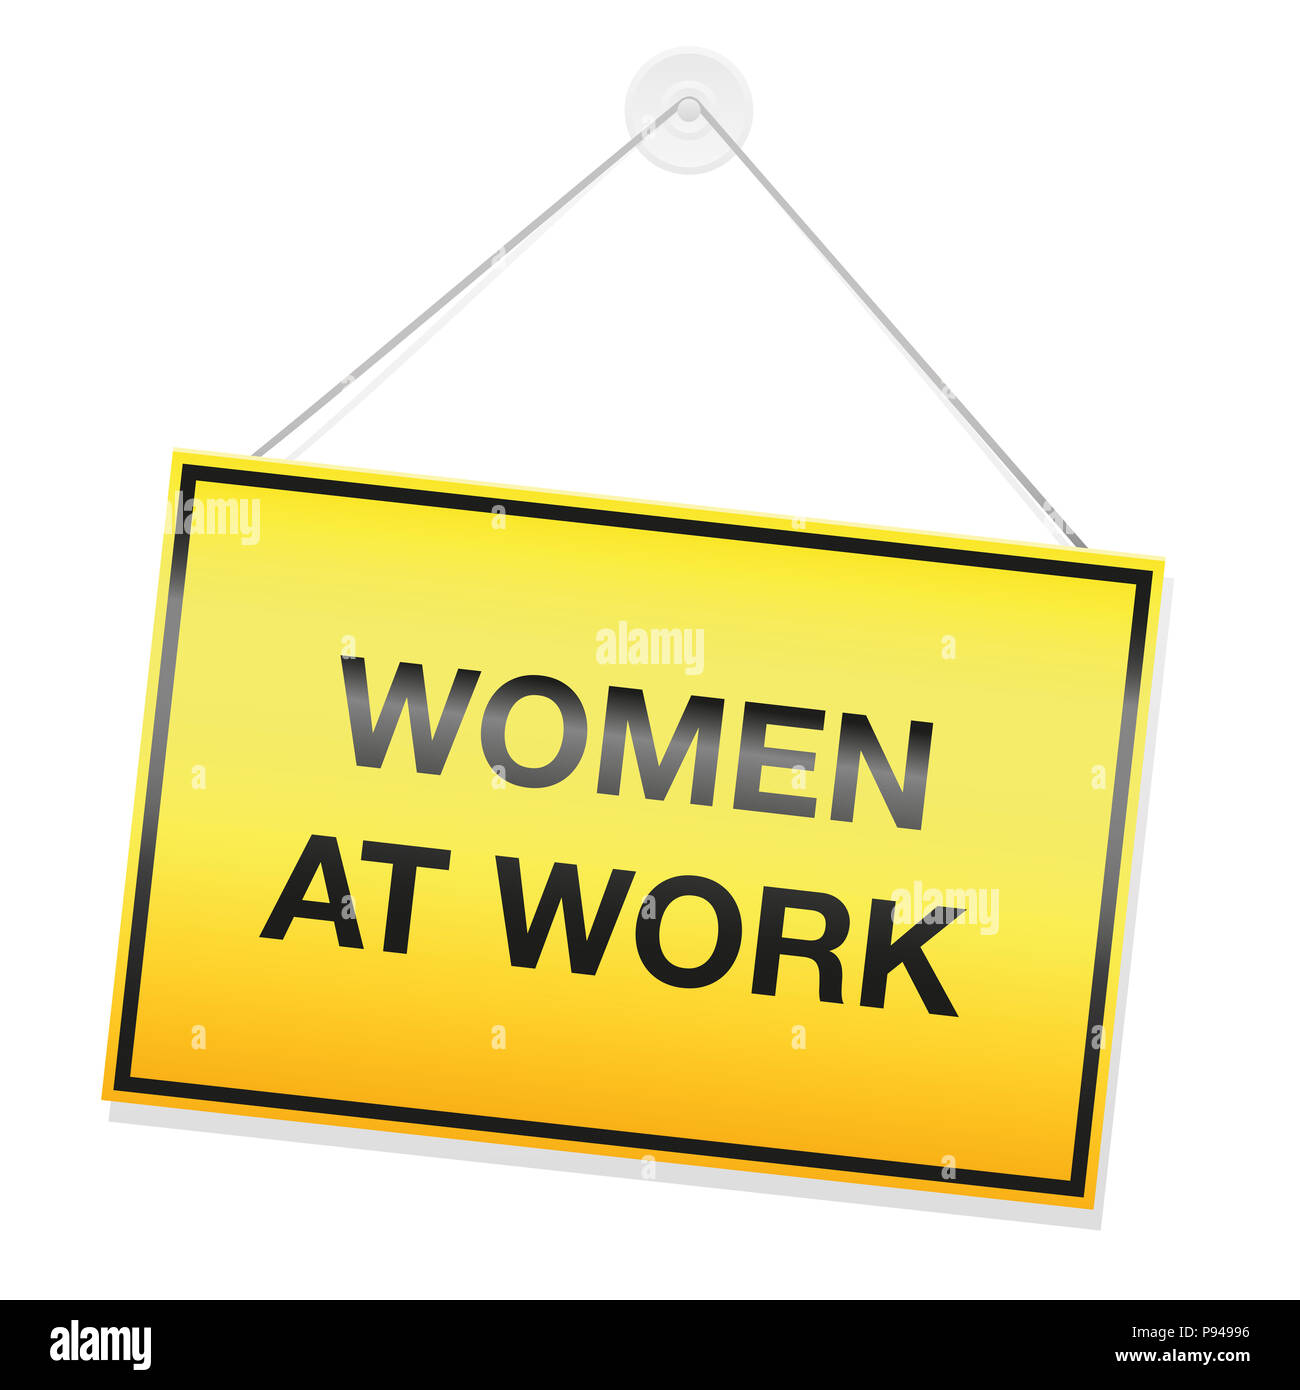 Women at work sign, yellow warning metal plate - illustration on white background. Stock Photo